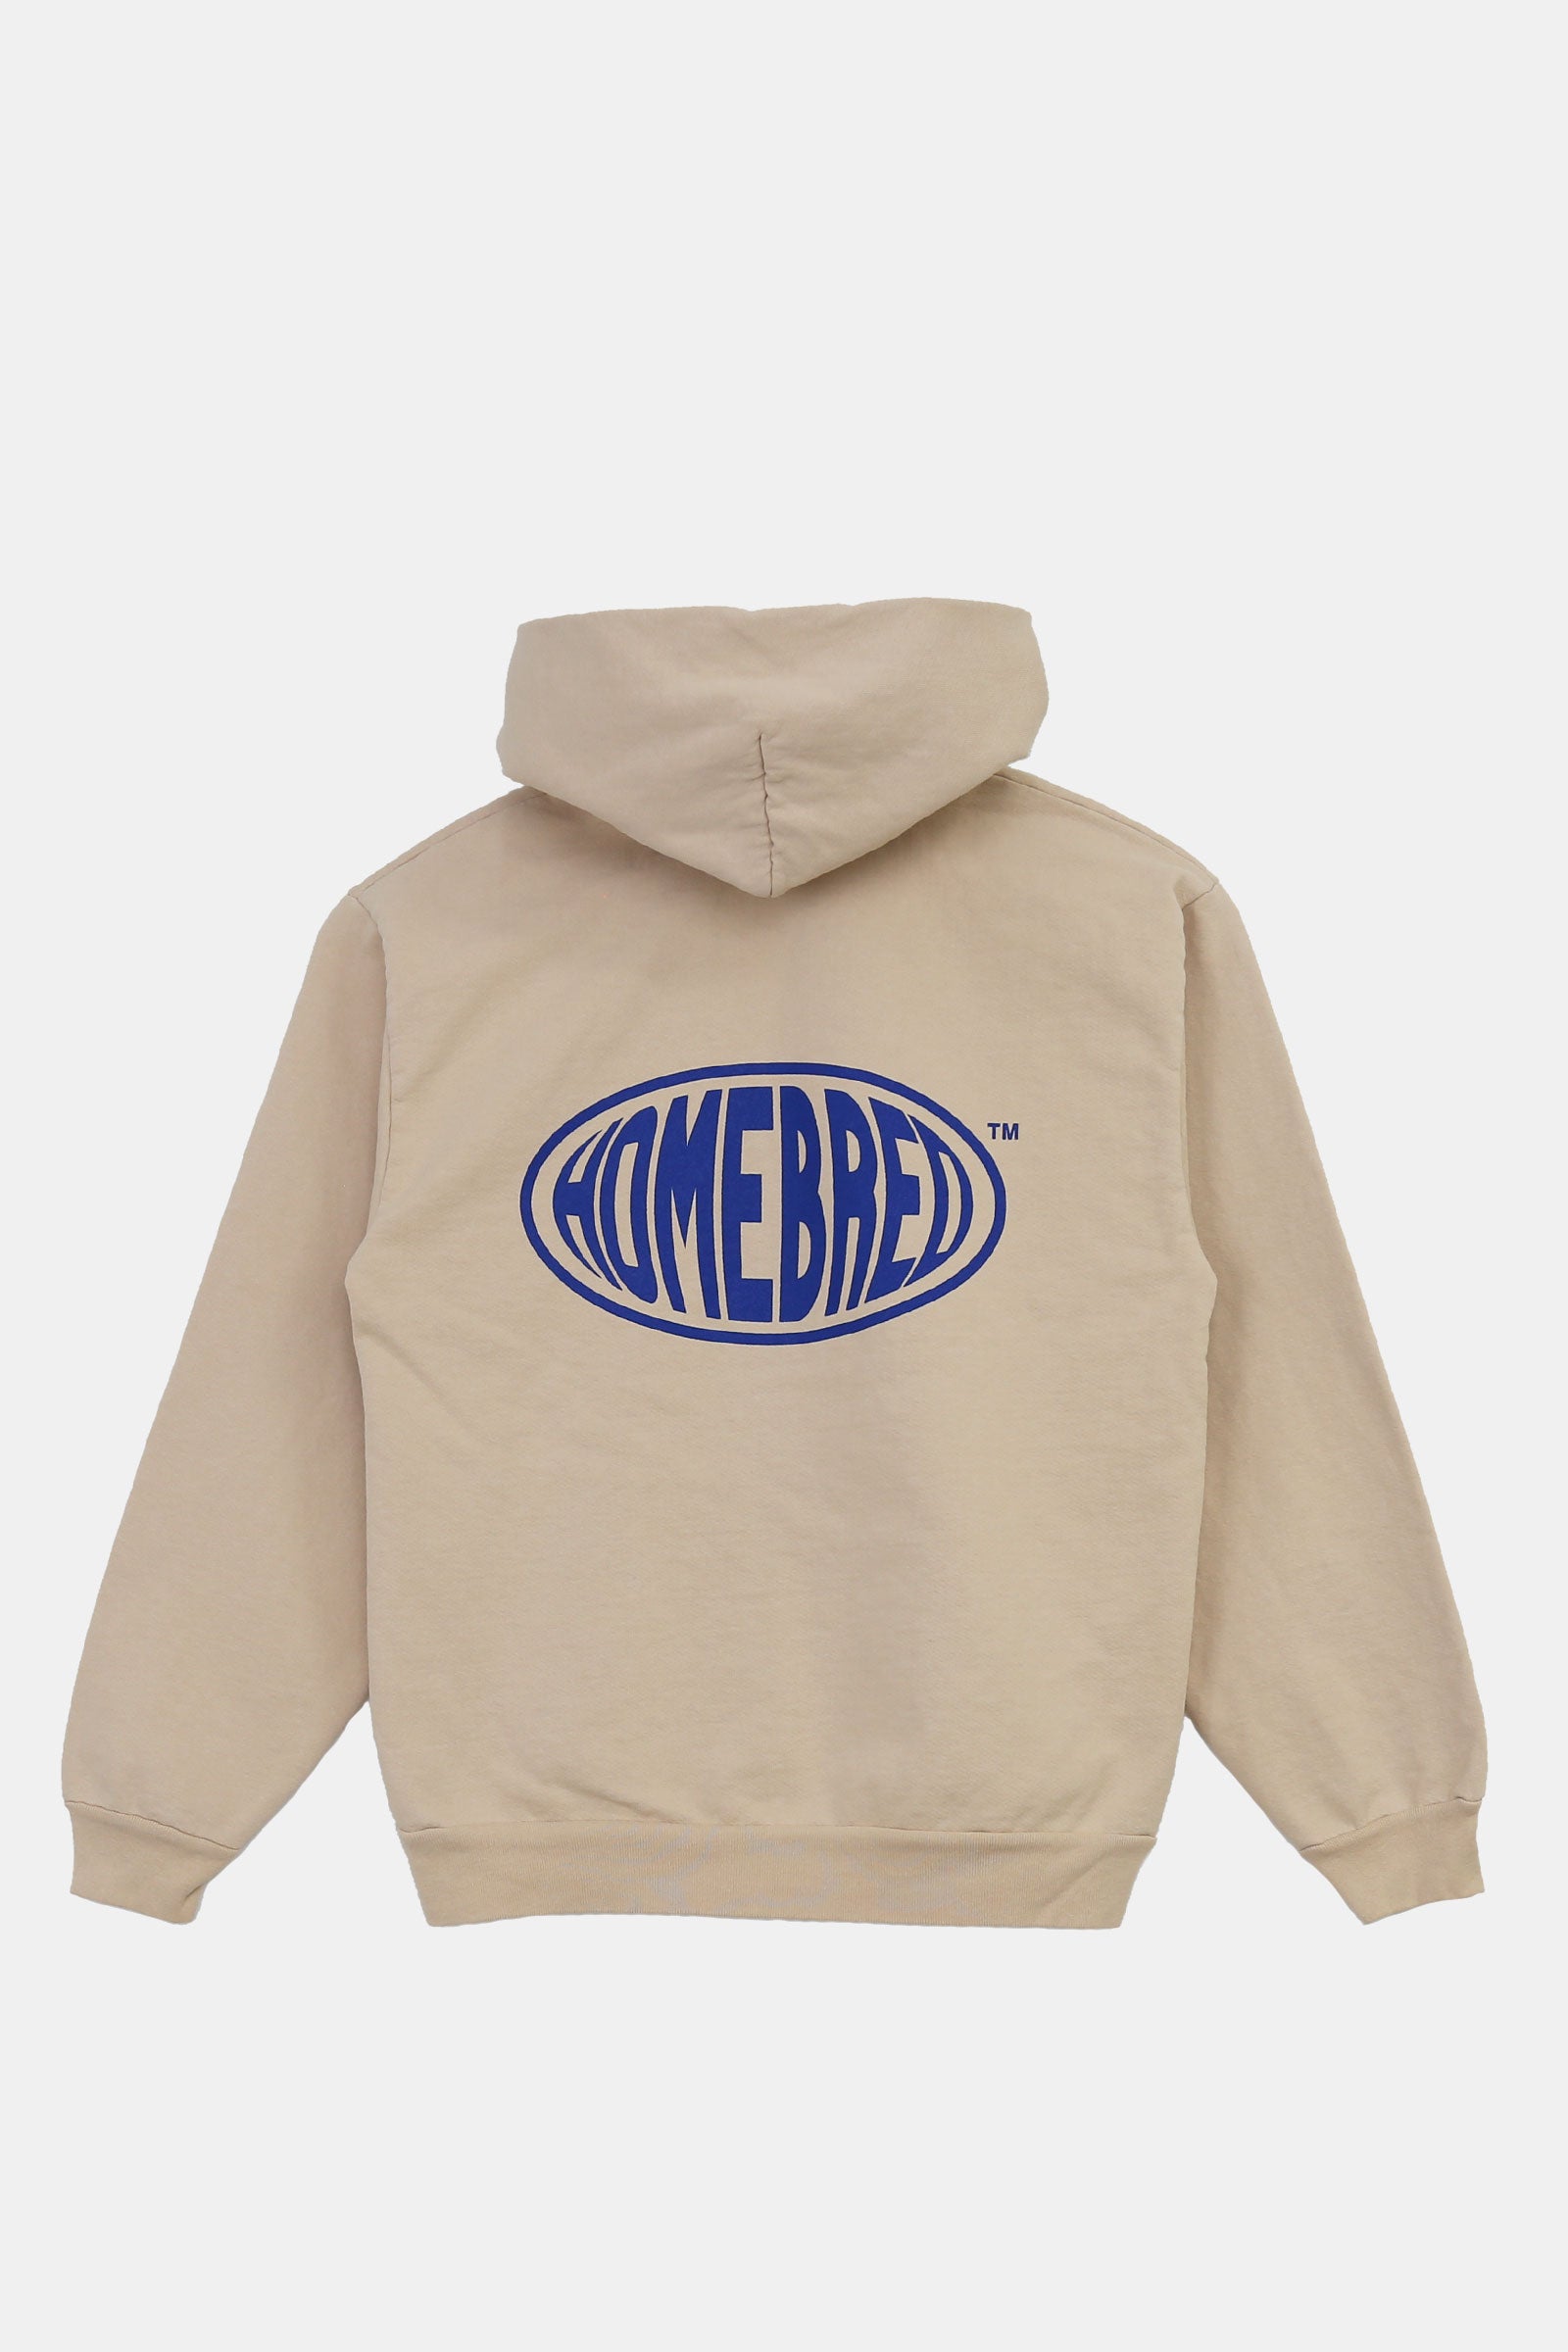 Homebred Ovoid Pullover Hoodie